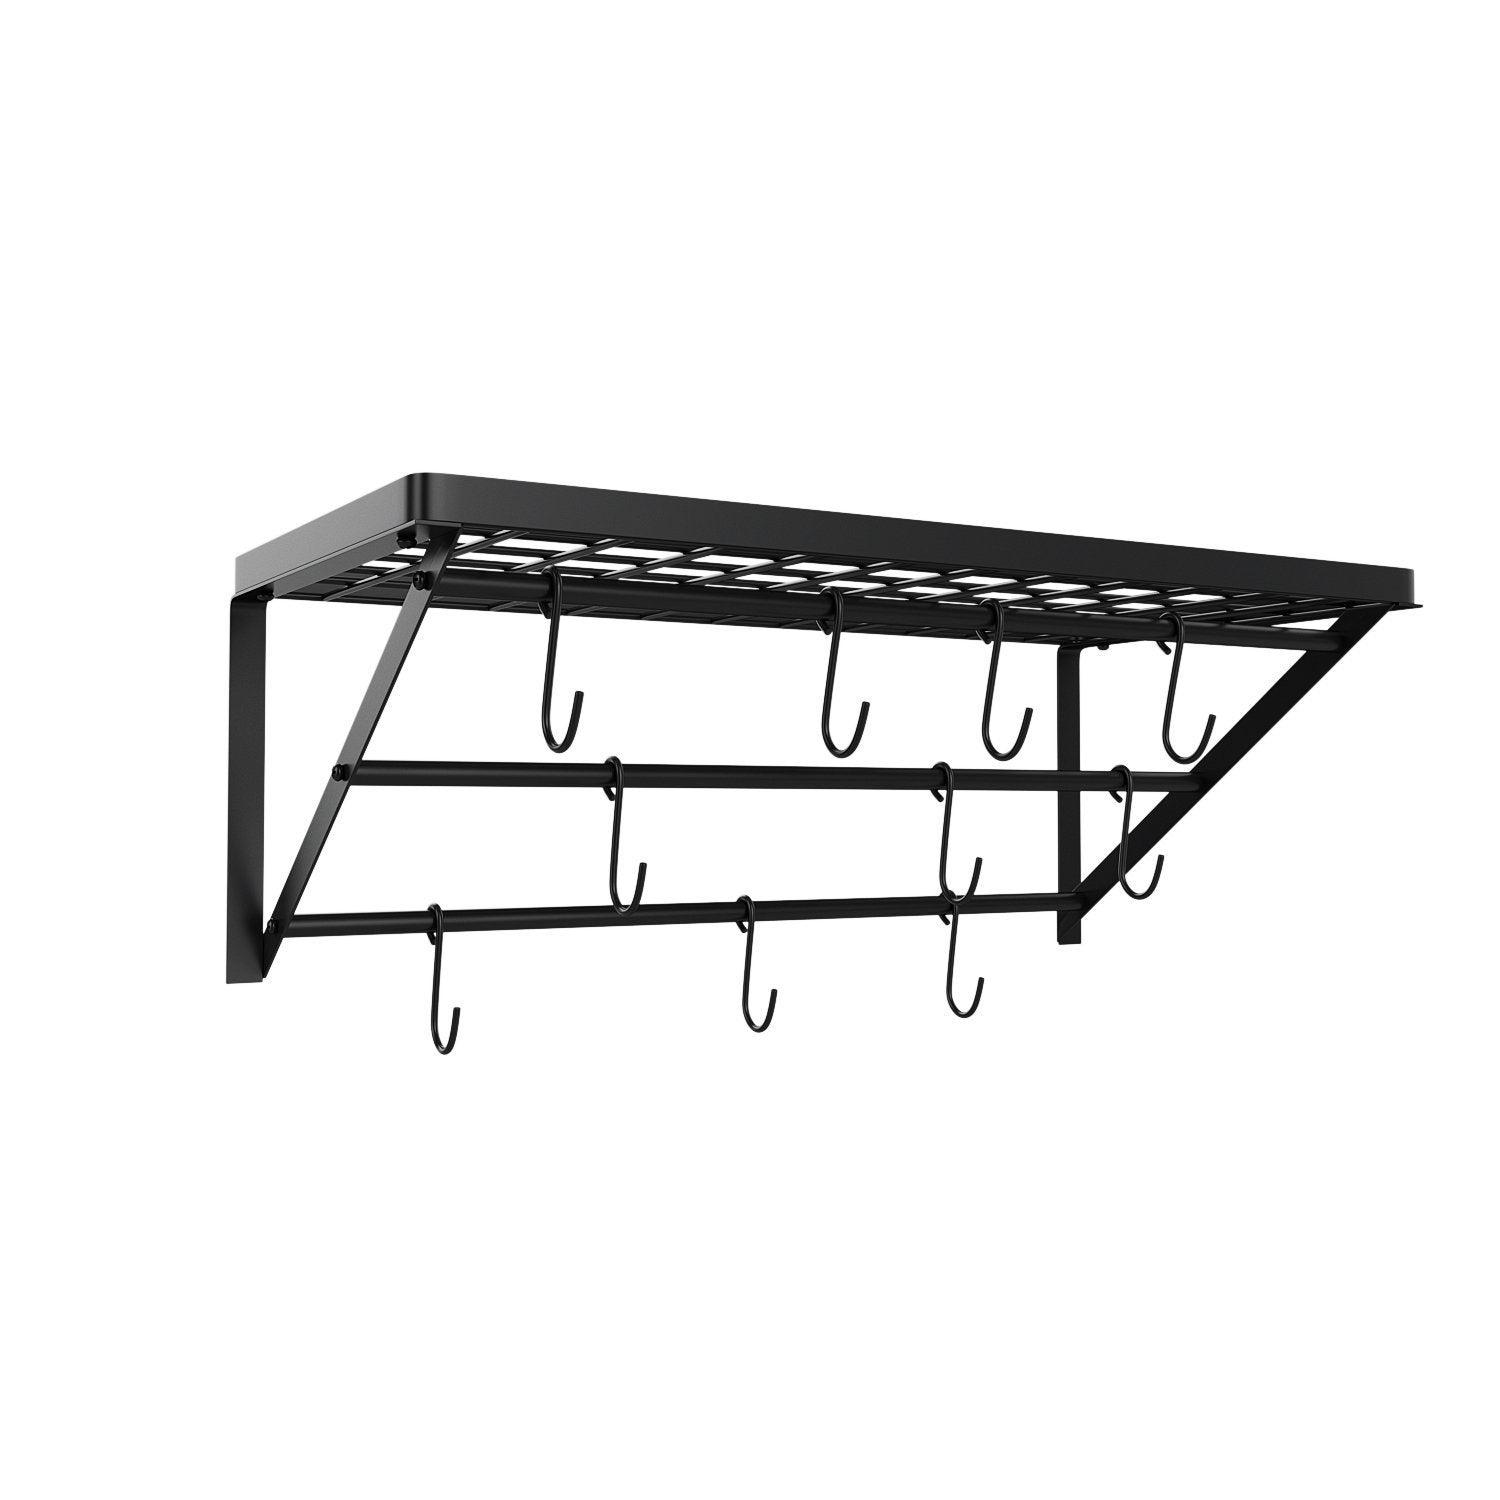 Save on homevol kitchen wall mounted pot rack with 10 hooks multi functional storage rack shelf organizer ideal for bathroom household items and kitchen cookware utensils pans books